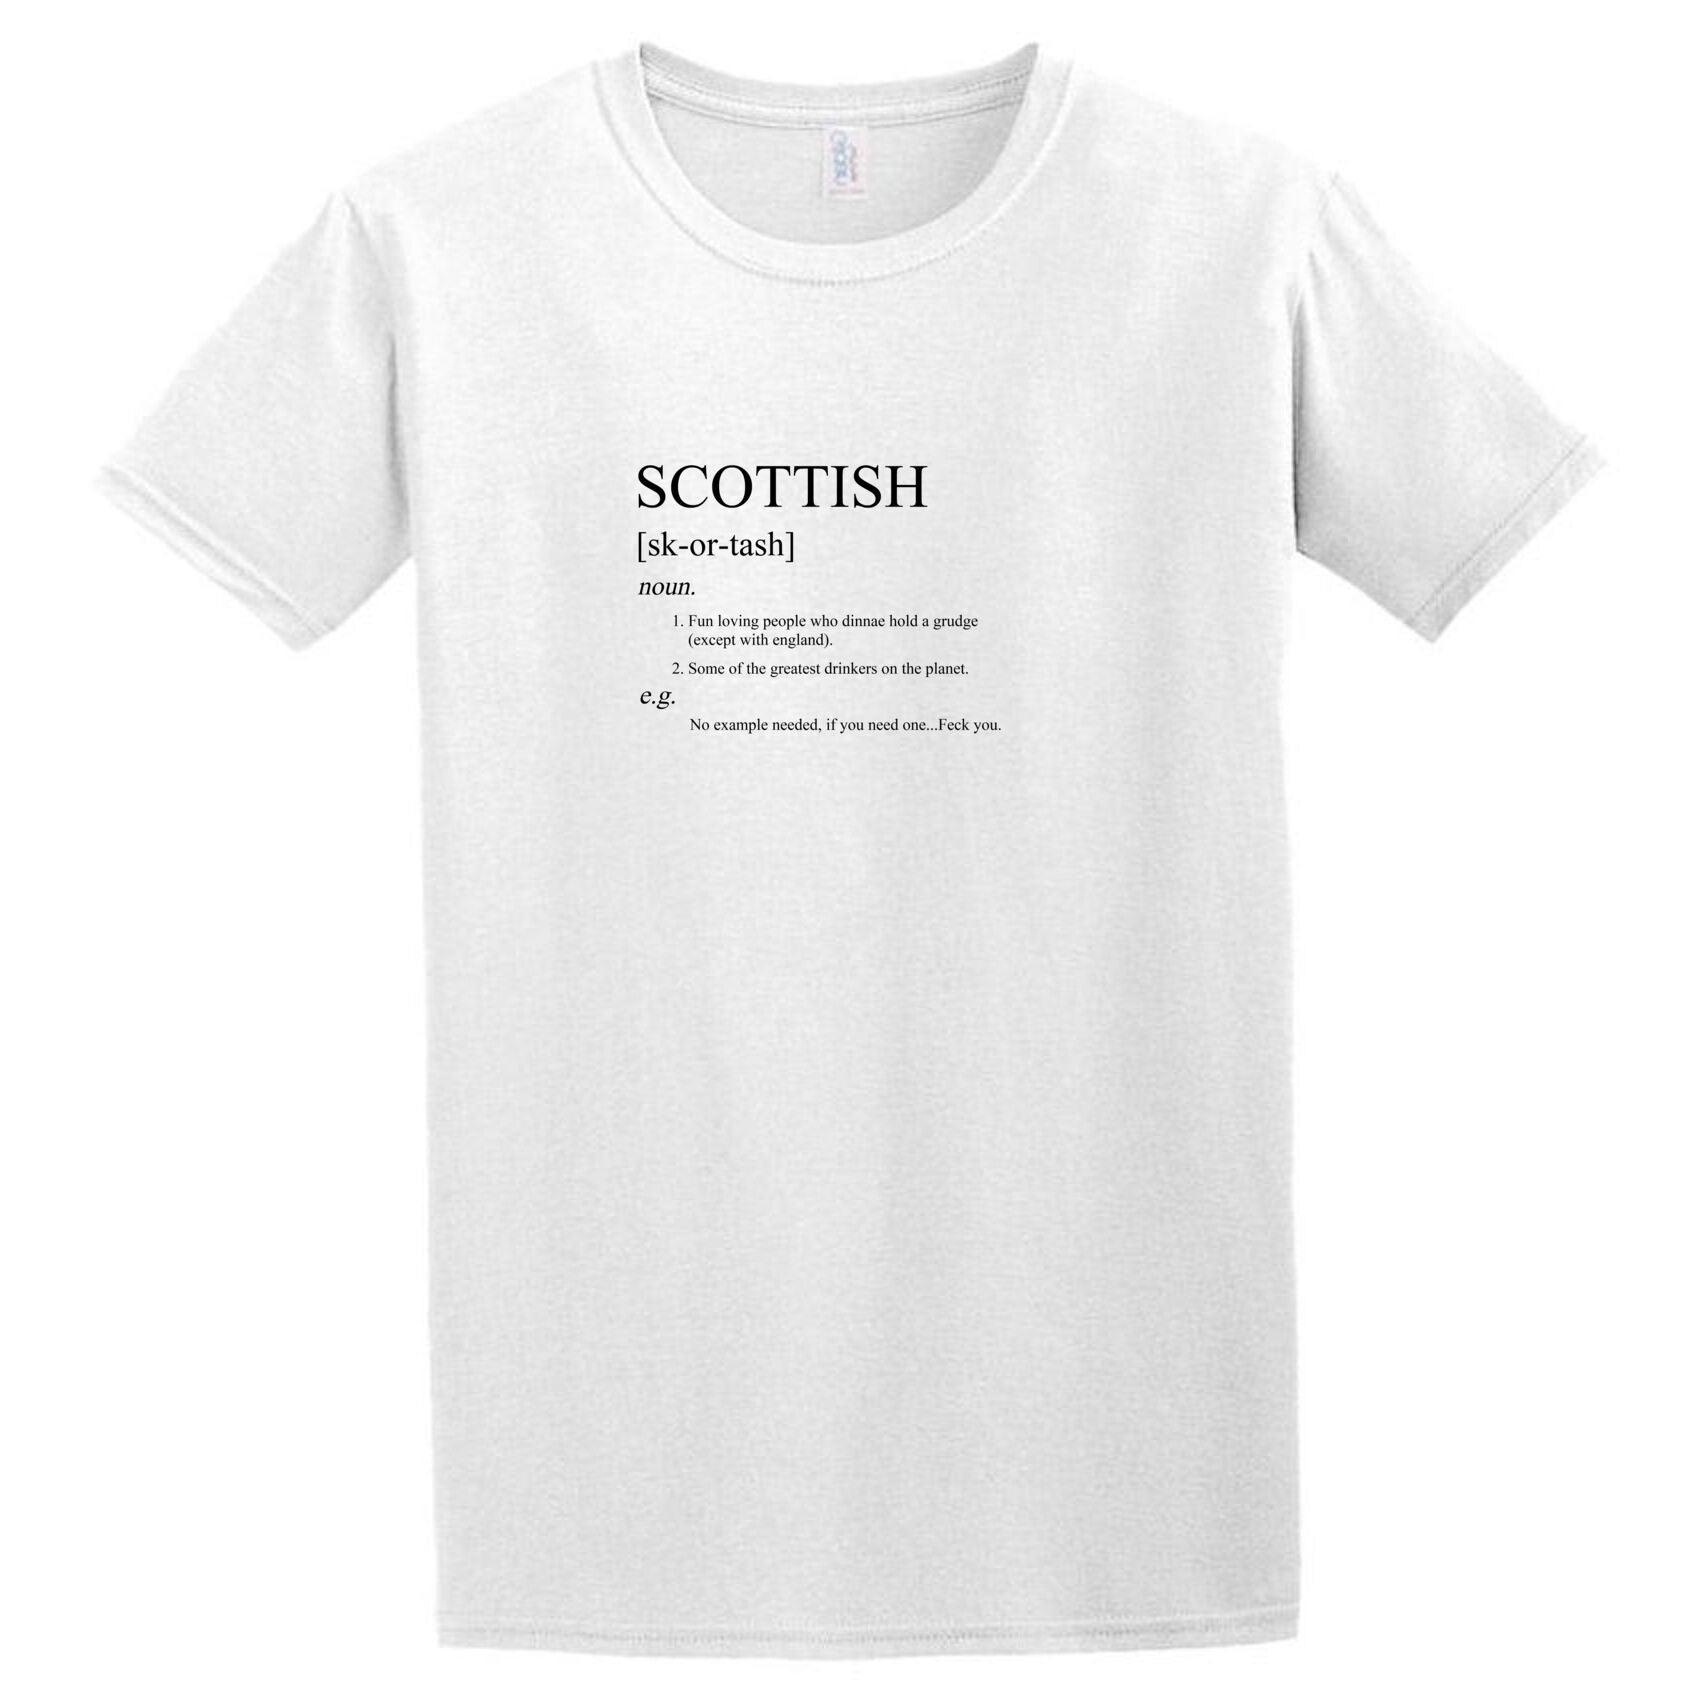 A white Scottish T-Shirt that says Twisted Gifts.